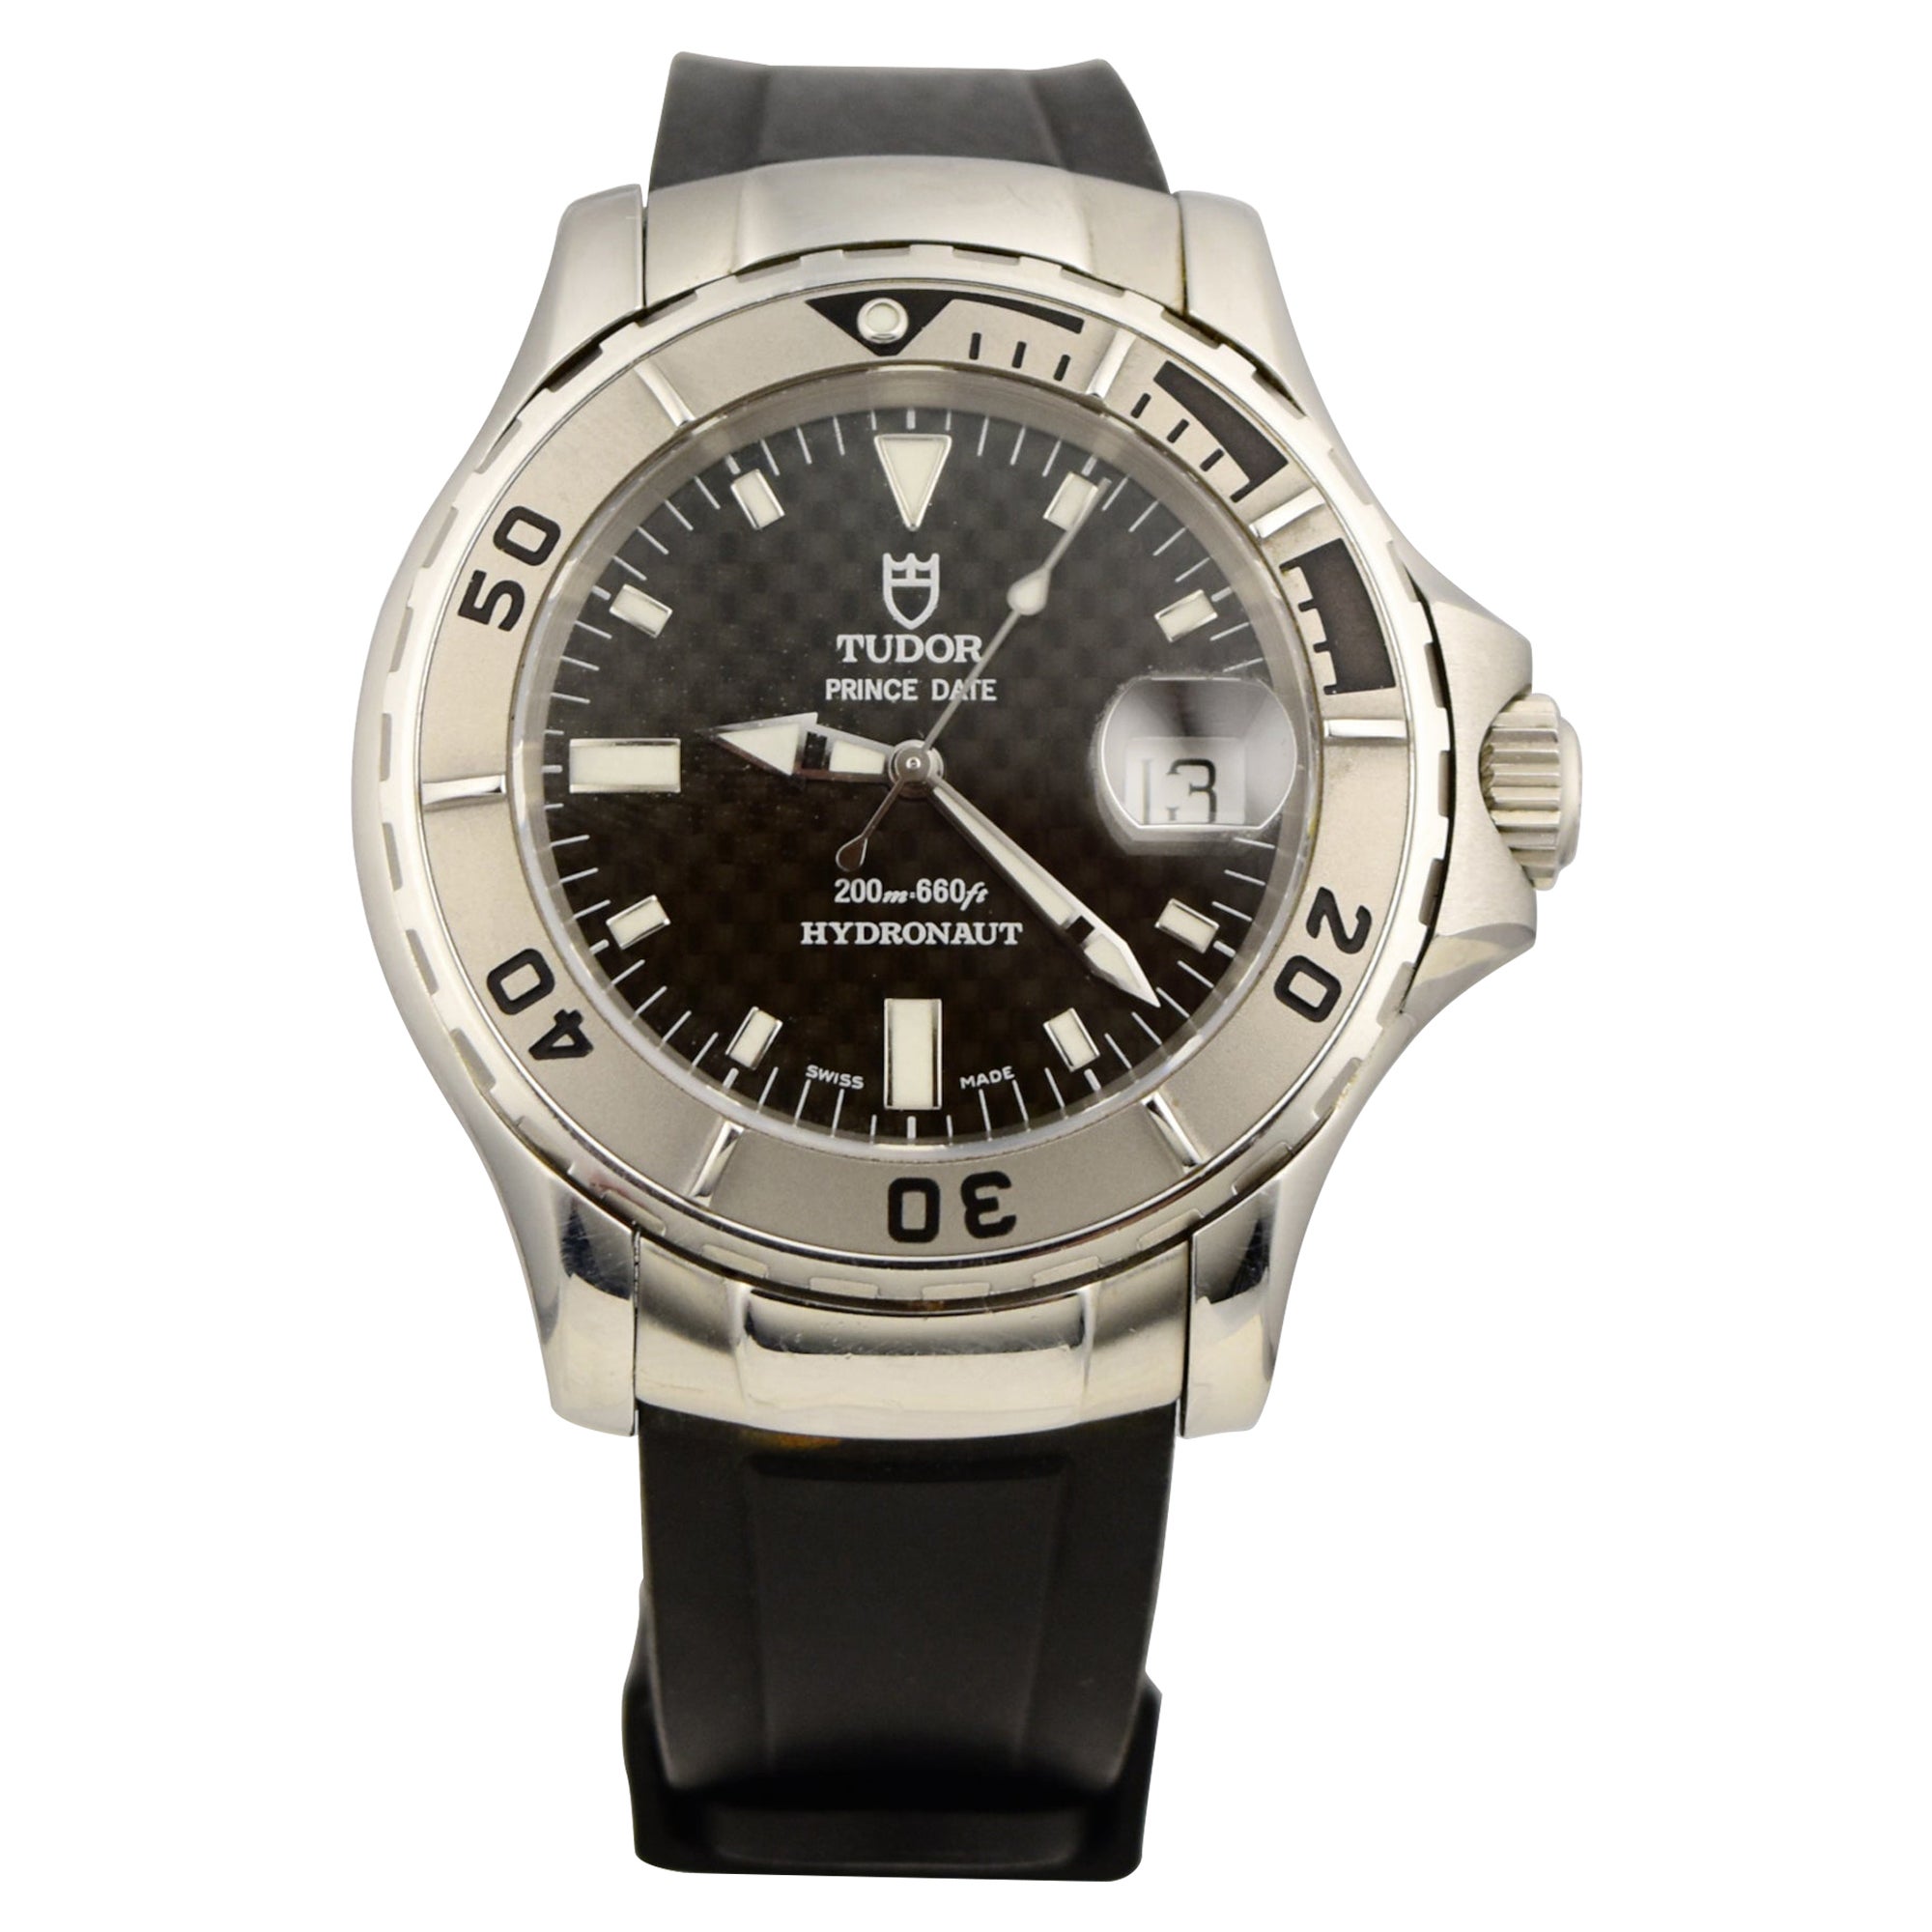 Tudor Hydronaut Prince Date Ref. 89190 Stainless Steel Rubber Strap Watch